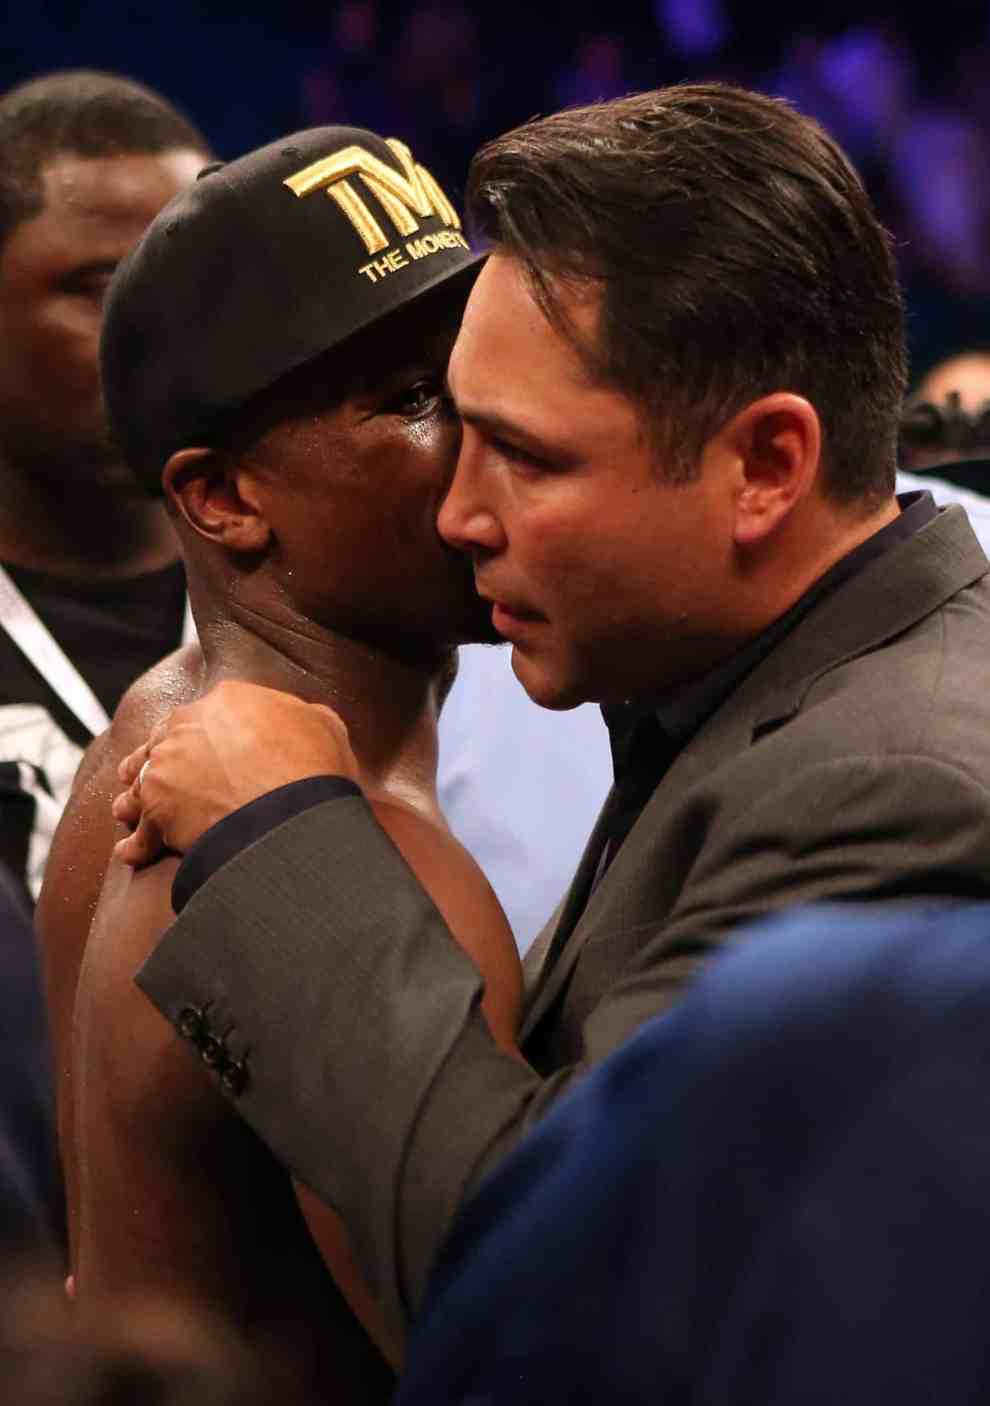 Floyd Mayweather Jr. speaks with Oscar De La Hoya after WBC welterweight title bout at MGM Grand Garden Arena on May 4